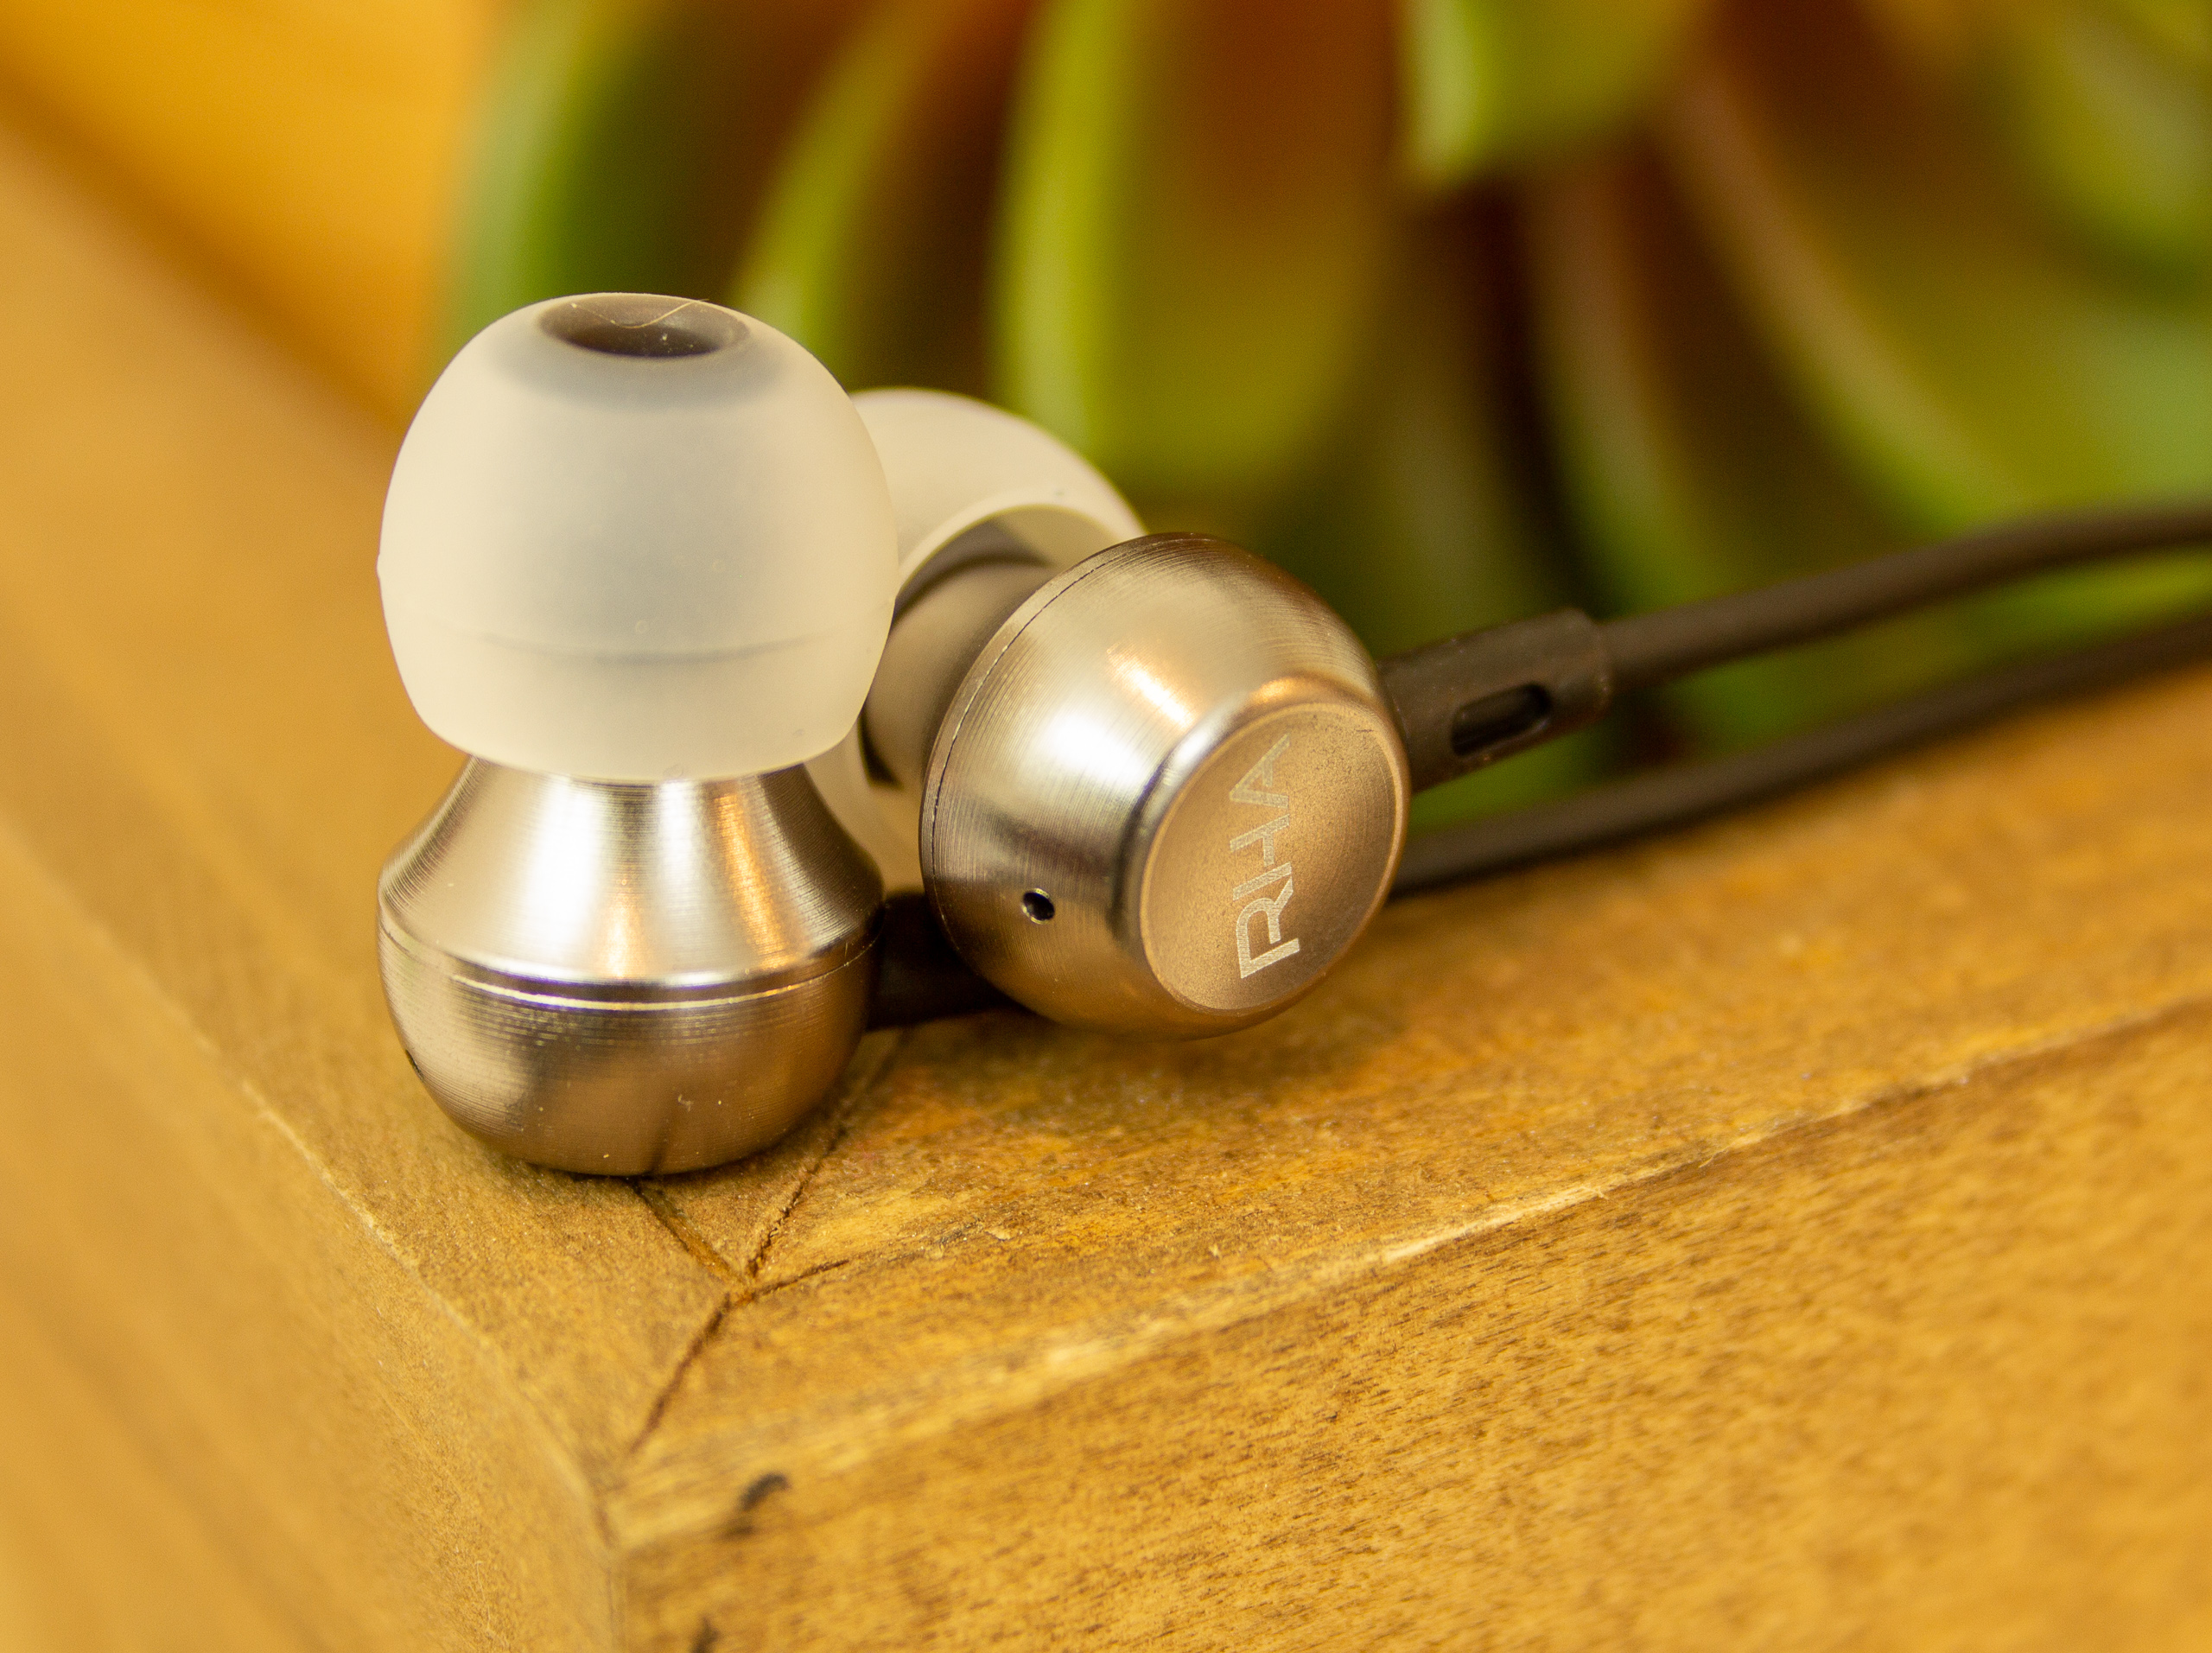 The 5 Best Earbuds under $50 in 2019 | The Nerdy